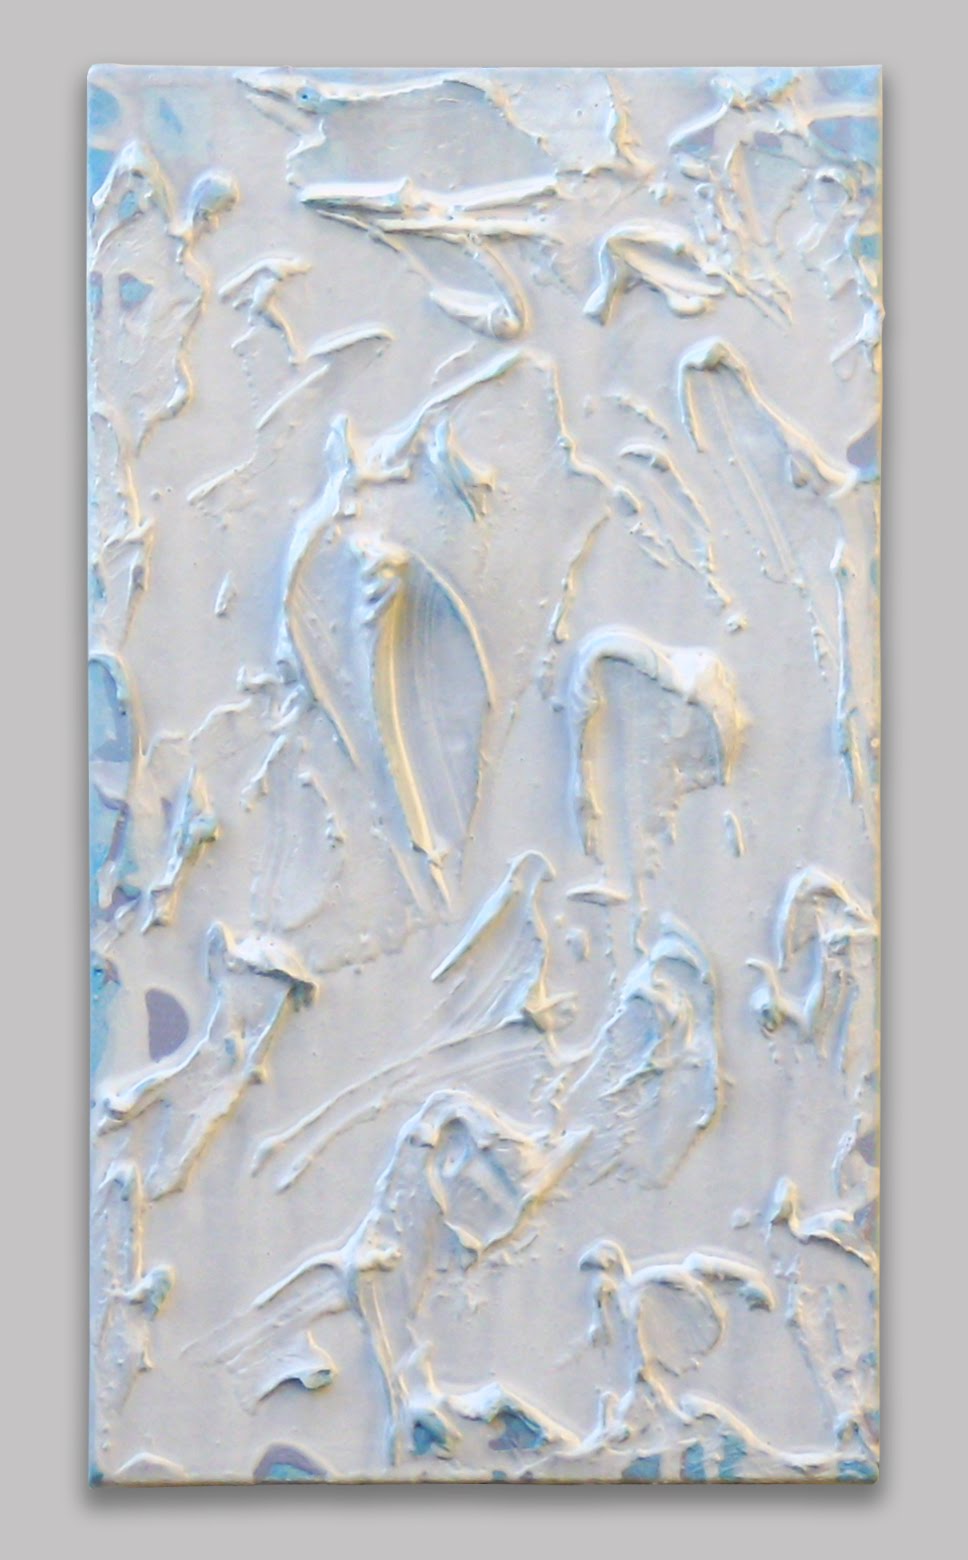 Jeffrey Collins: On Painting: White Painting